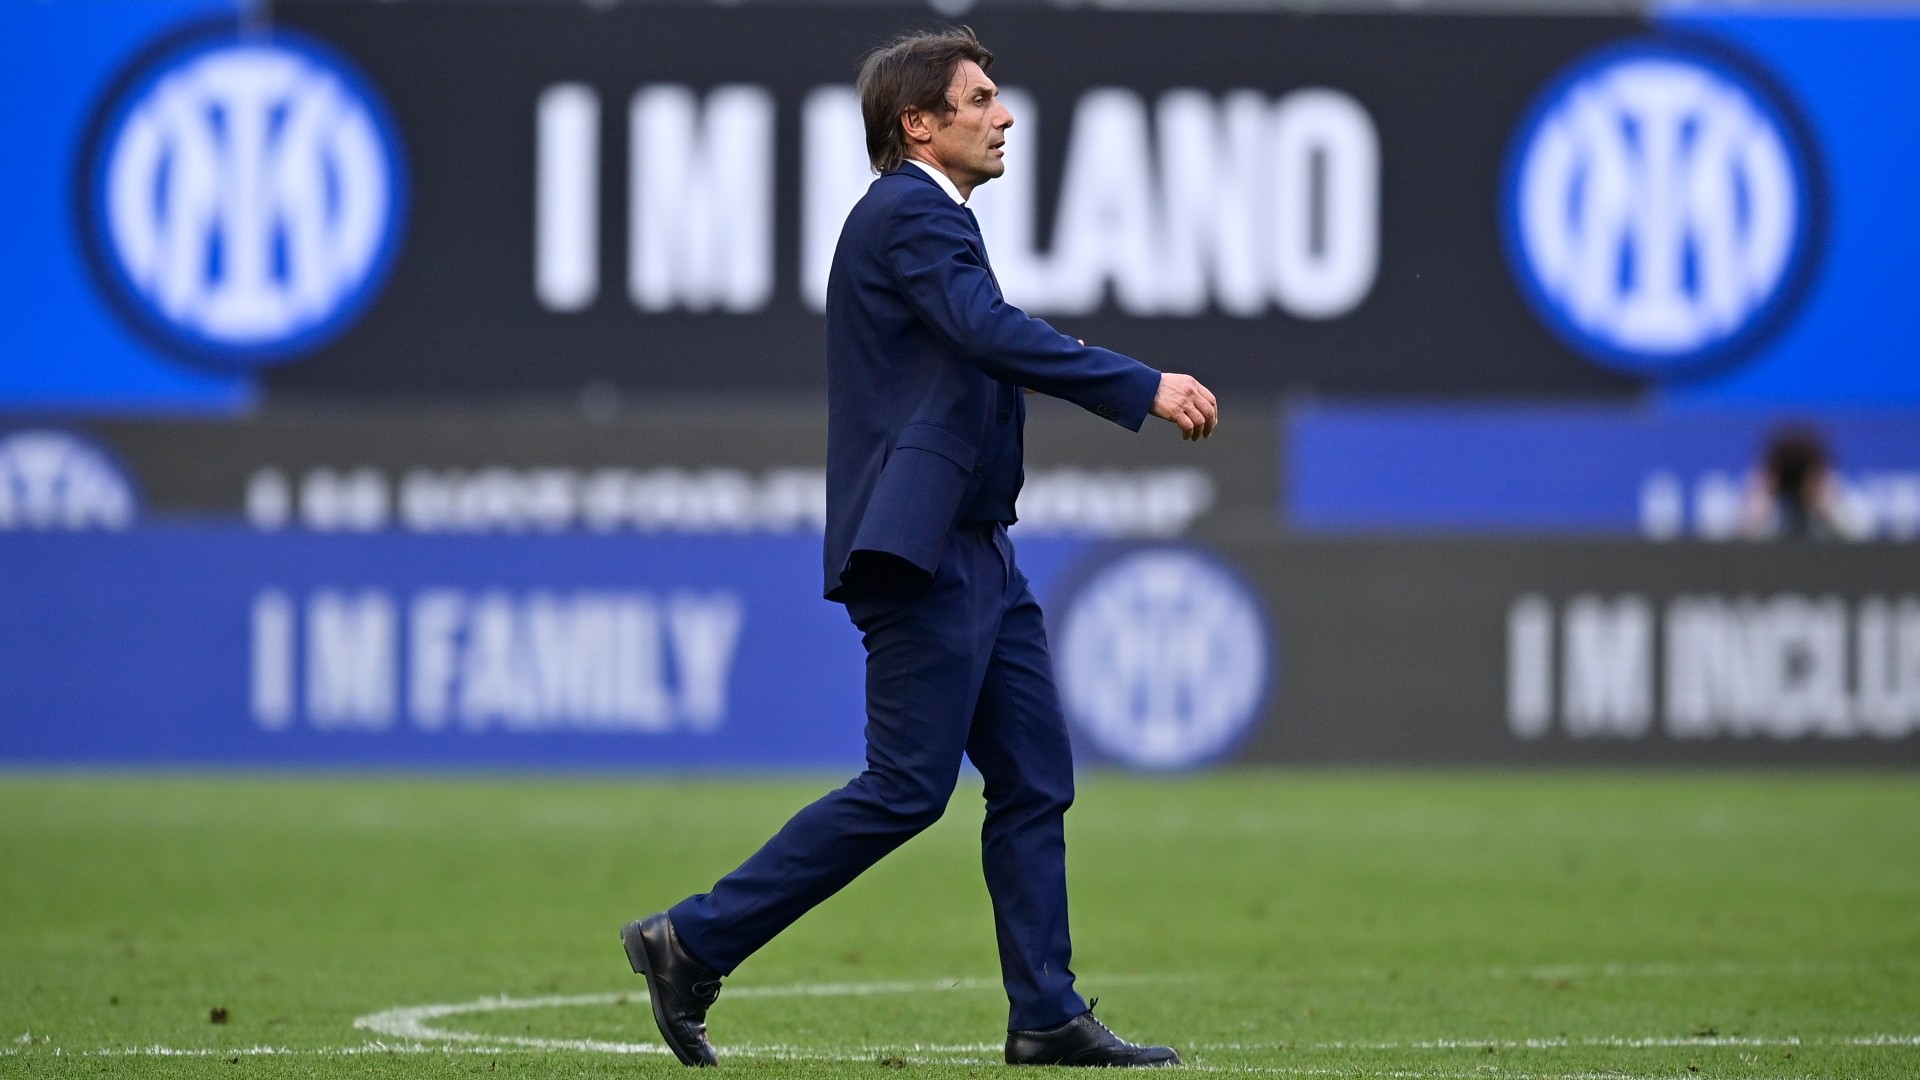 Conte leaves Inter over dispute with club owners following Serie A